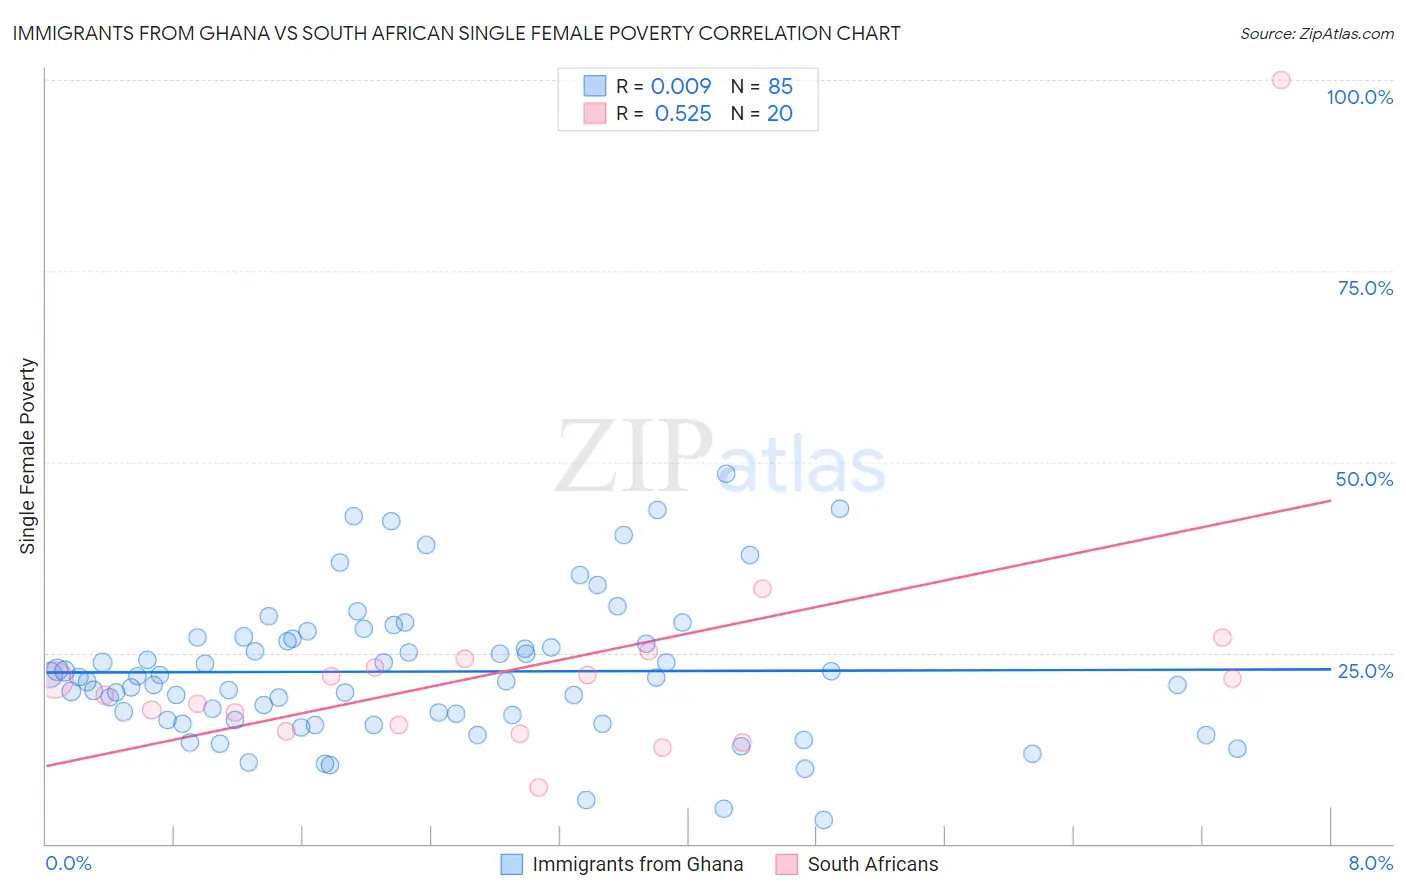 Immigrants from Ghana vs South African Single Female Poverty